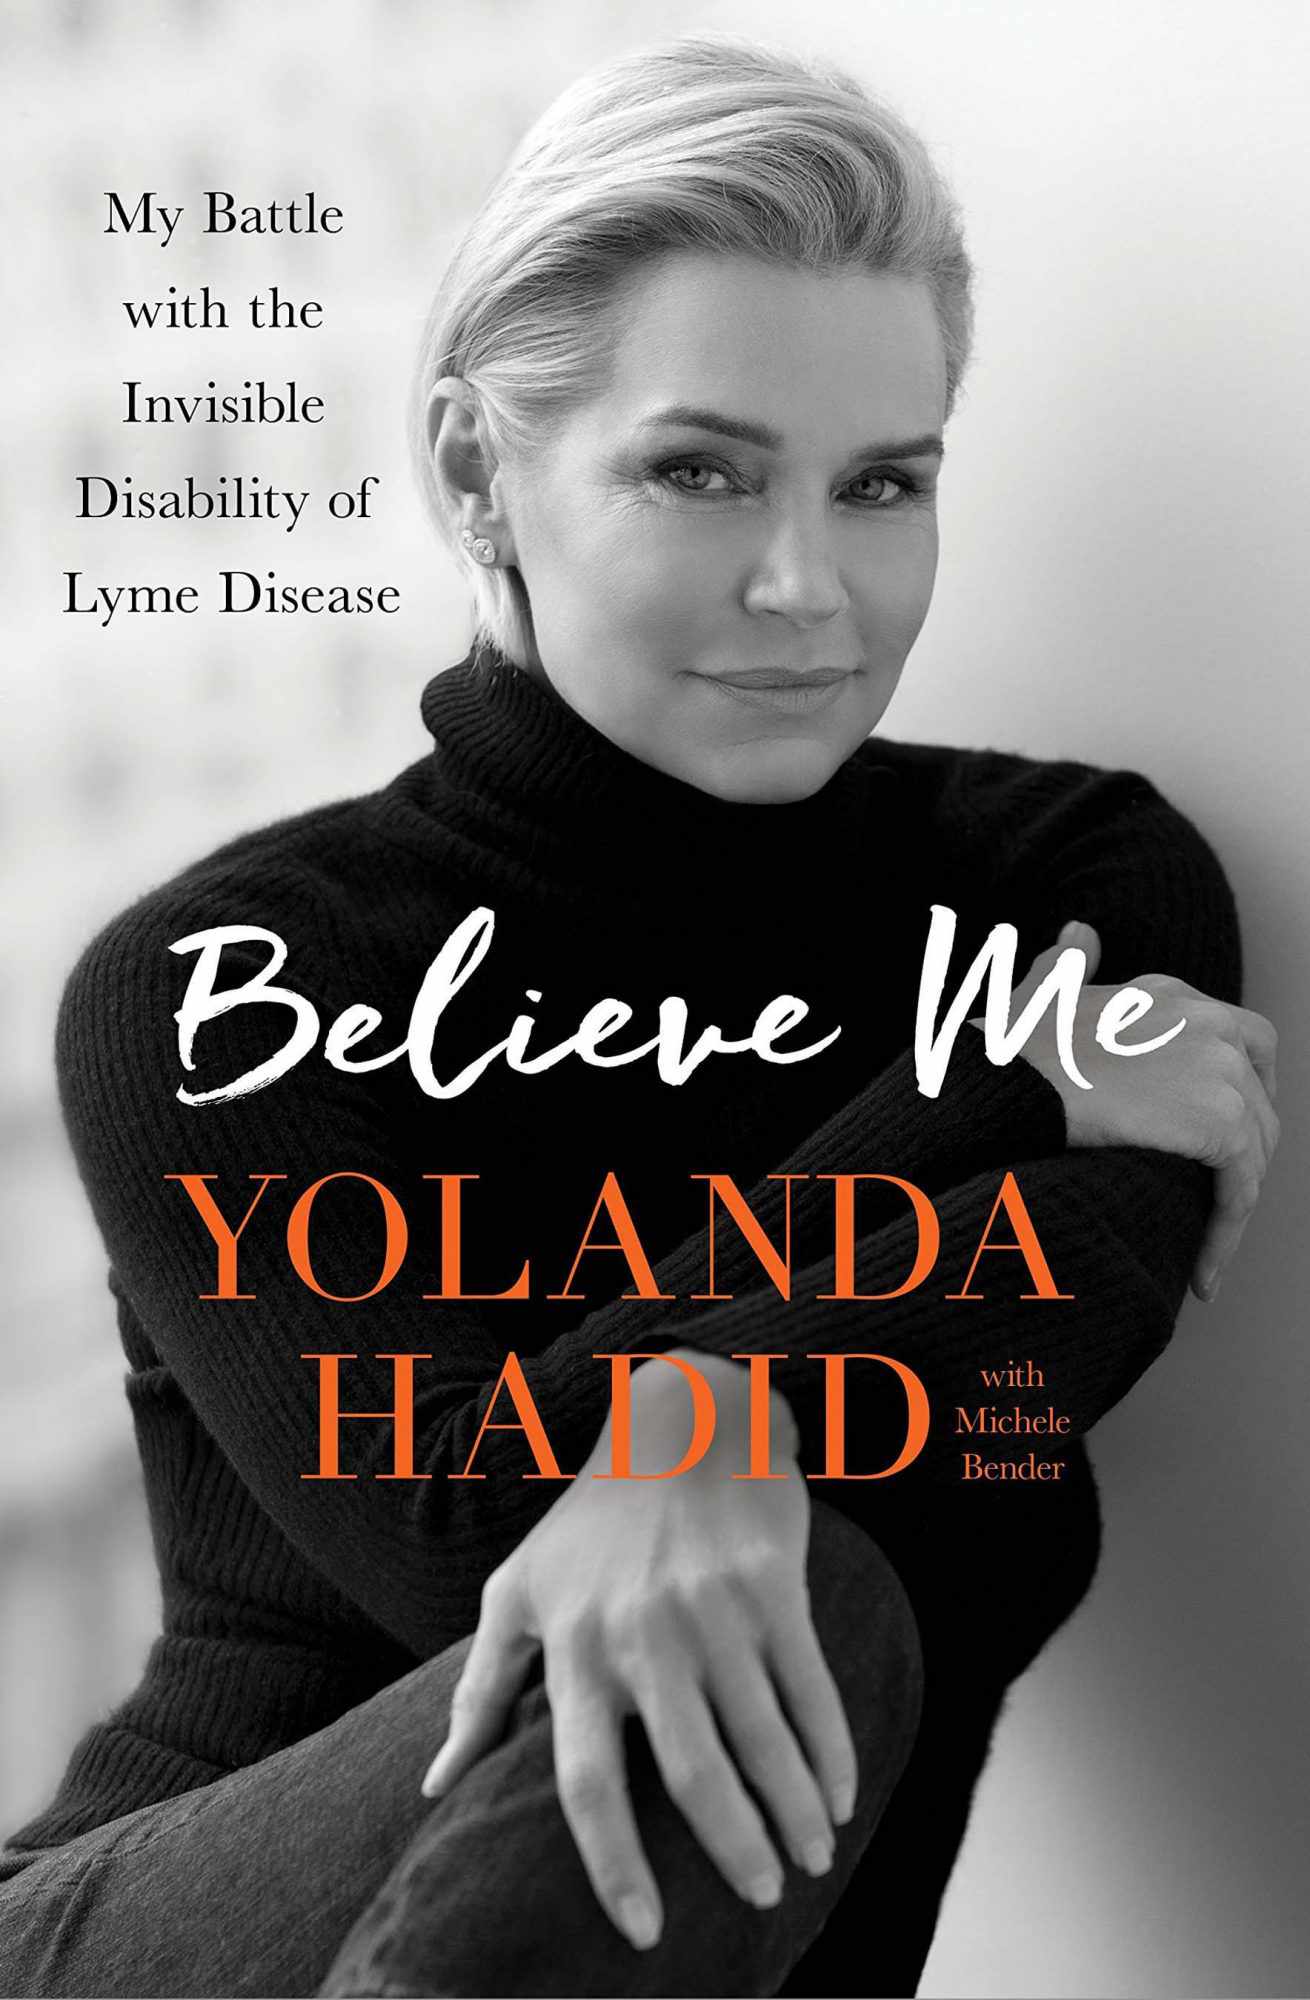 Believe Me: My Battle with the Invisible Disability of Lyme Disease, by Yolanda Hadid